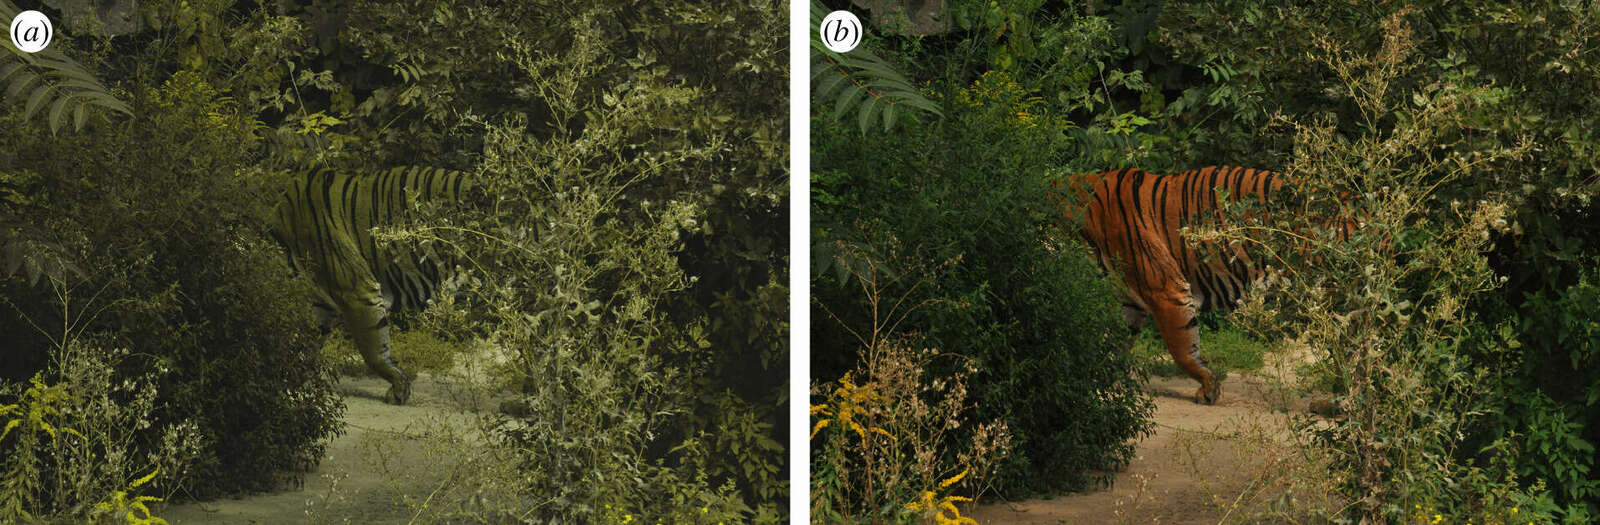 Figure 4: The effectiveness of tiger colouring in the dichromat context is striking. Image of a tiger (Panthera tigris) from the point of view of a simulated dichromat (a) and trichromat receiver (b). (Online version in color.)